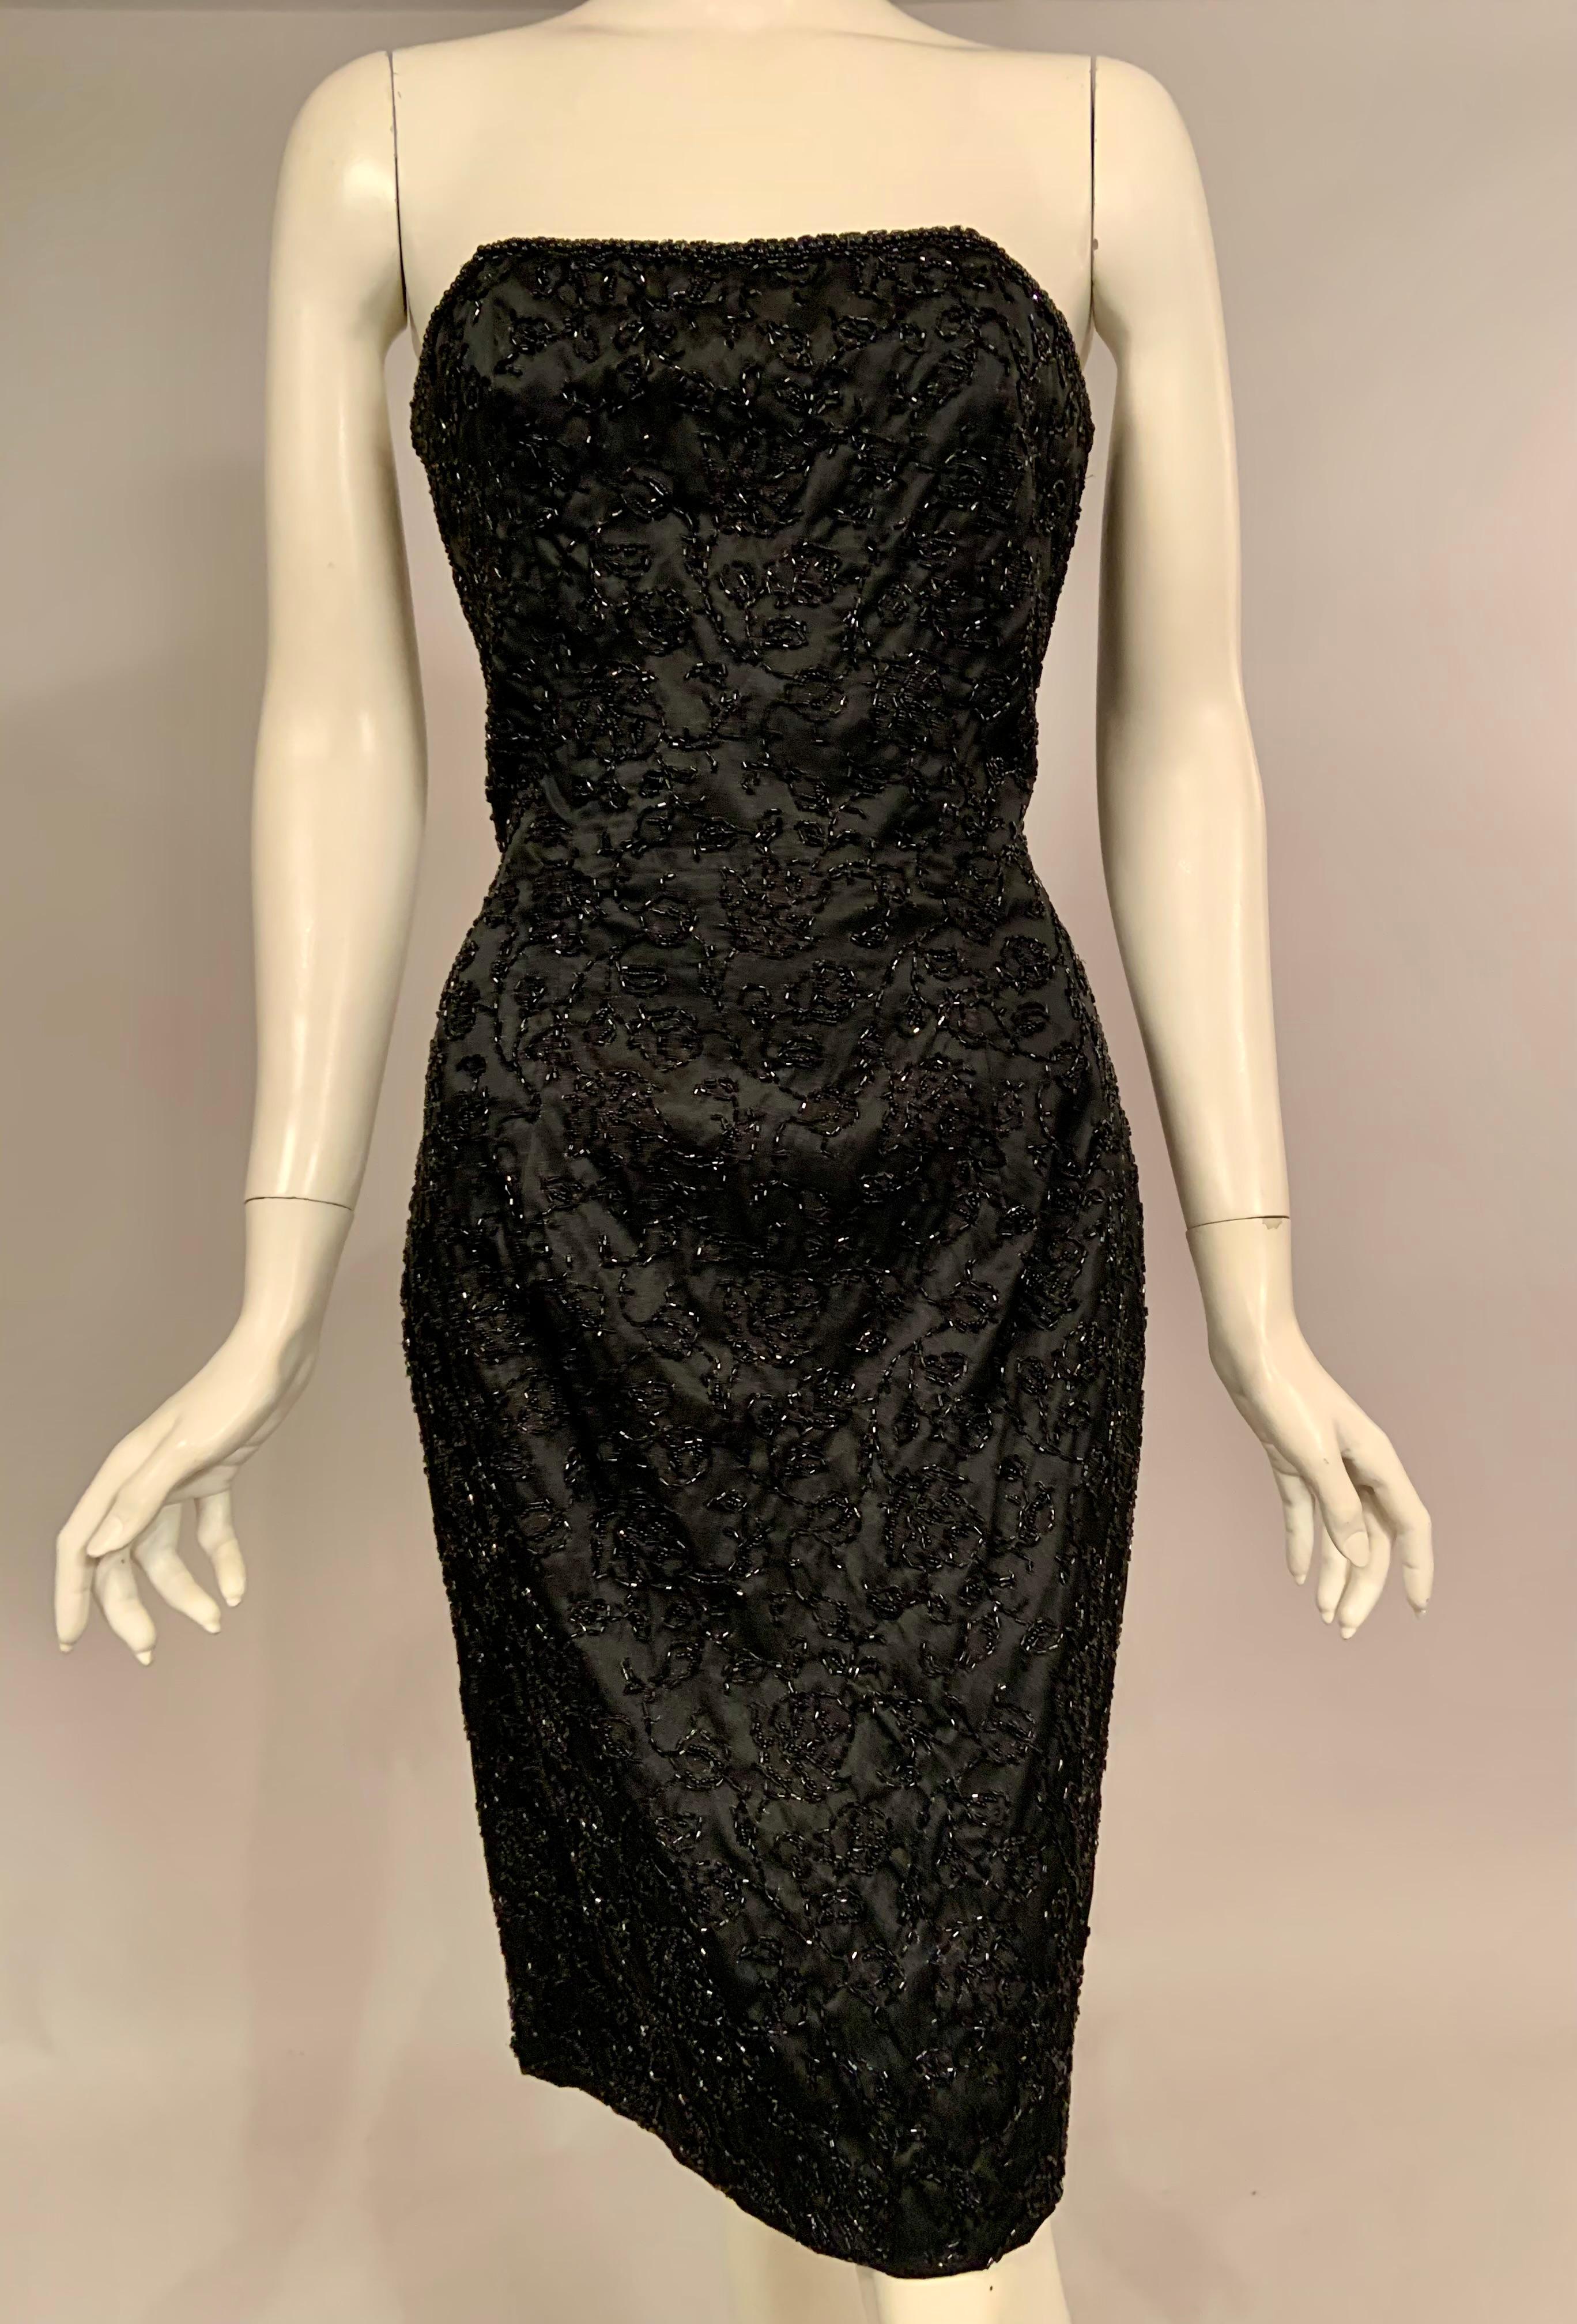 Women's Elaborately Beaded Strapless Black Cocktail Dress and Jacket  circa 1950 For Sale